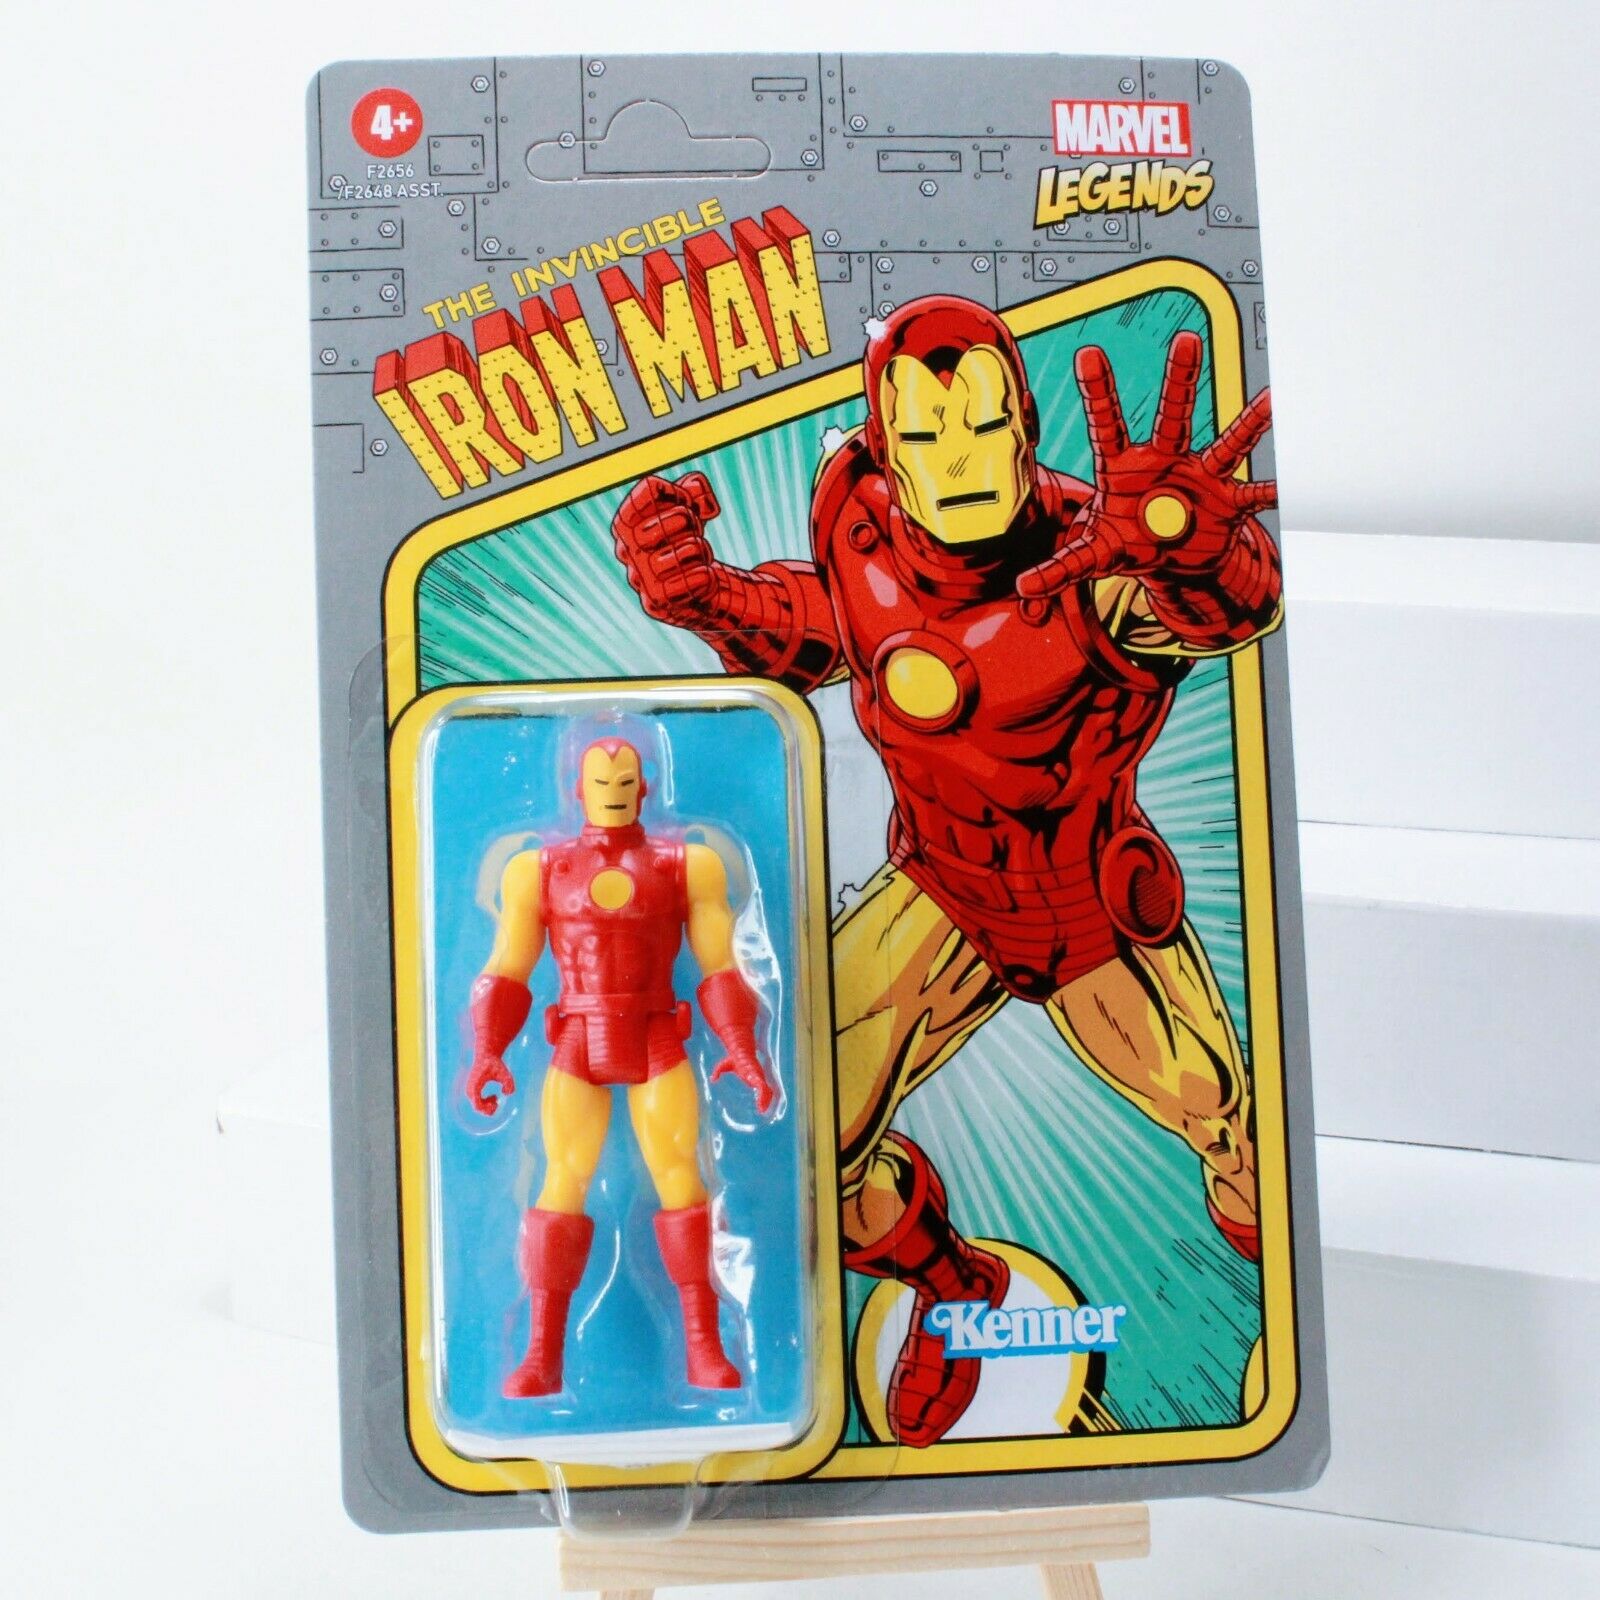 Marvel Legends Retro Collection Iron Man - 3.75" Action Figure Kenner